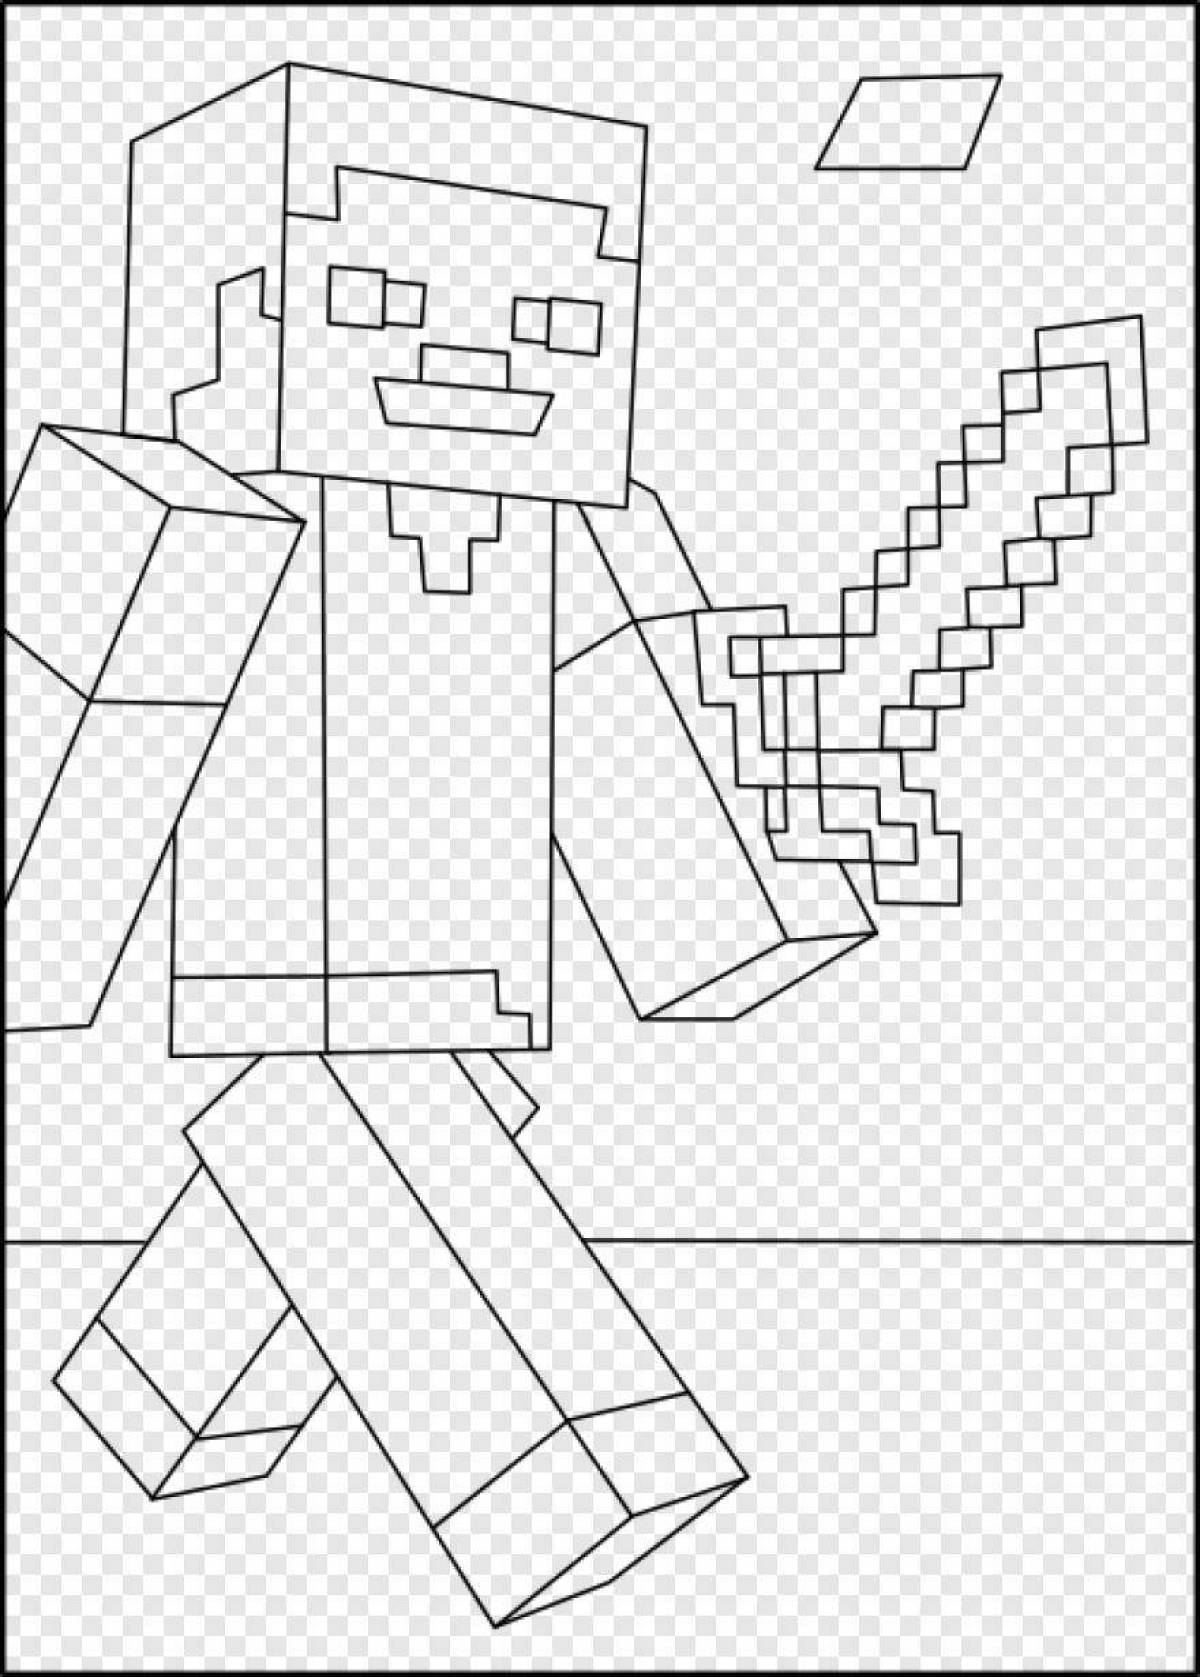 Adorable cool minecraft coloring book for boys